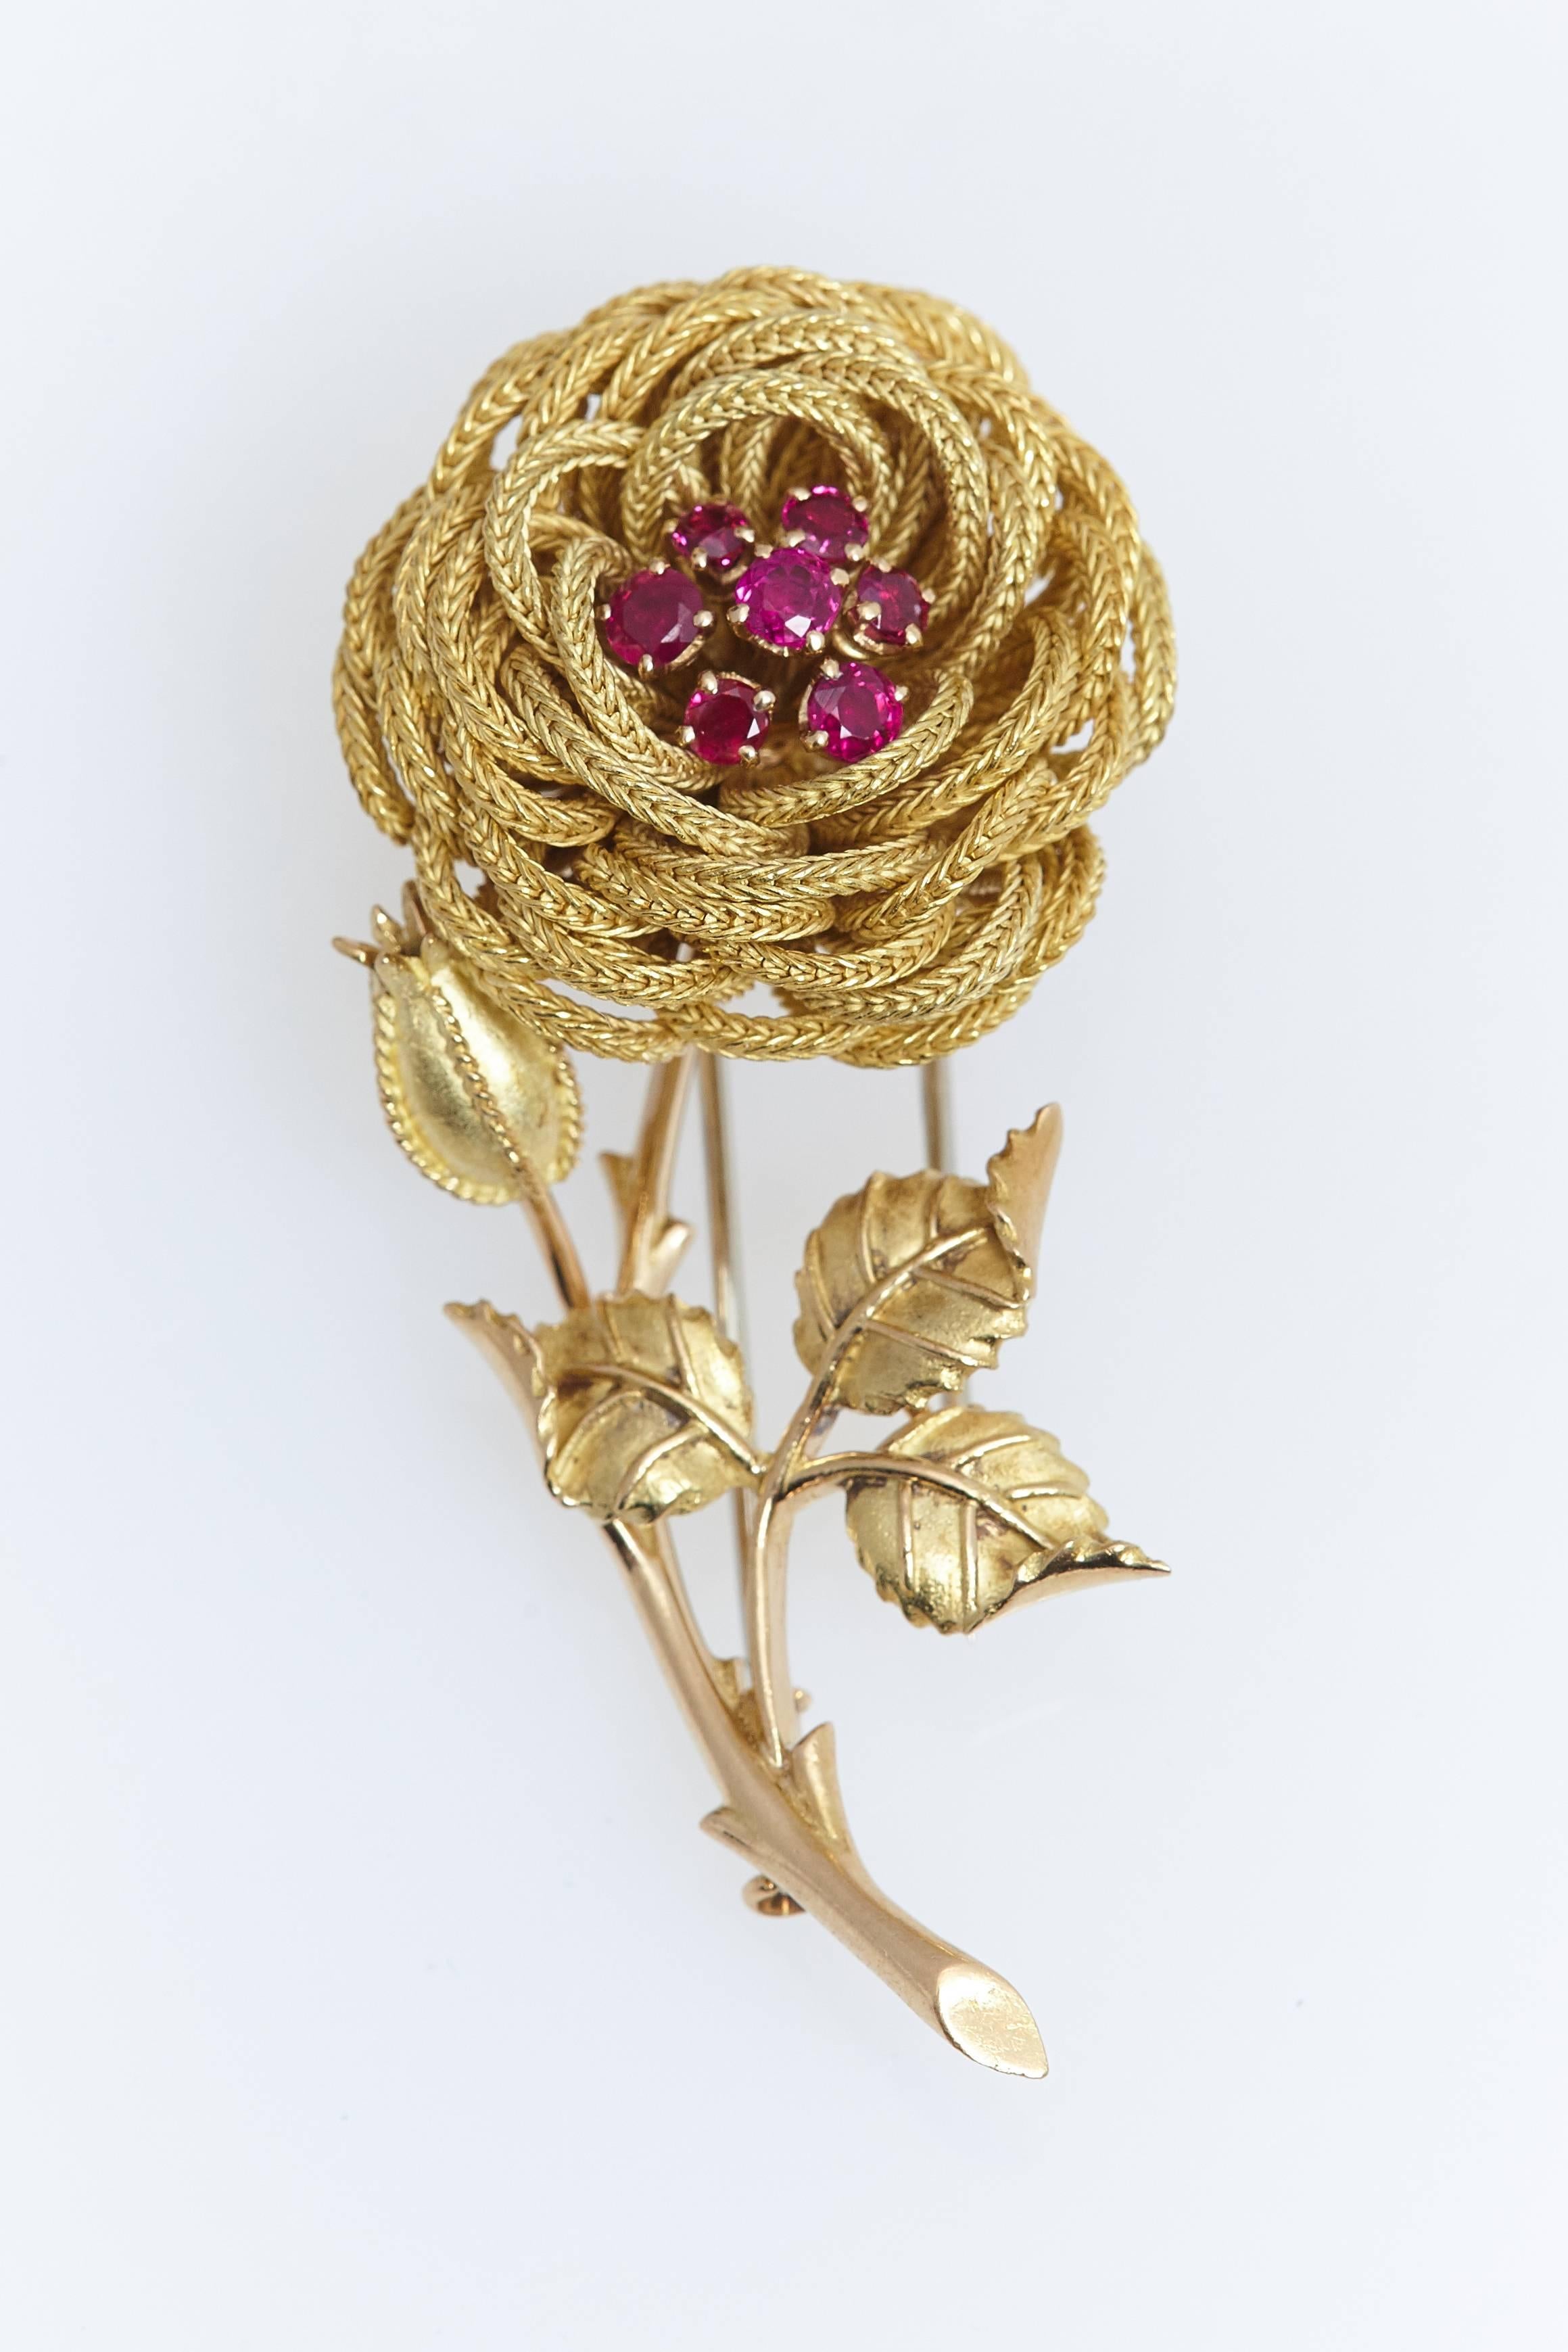 Pair of eighteen karat yellow gold and ruby flower design ear clips and matching brooch. The ear clips measure 3/4 inch in diameter. The brooch is 2 1/4 inch in length.  The pieces are signed "Made in France" and "18K."